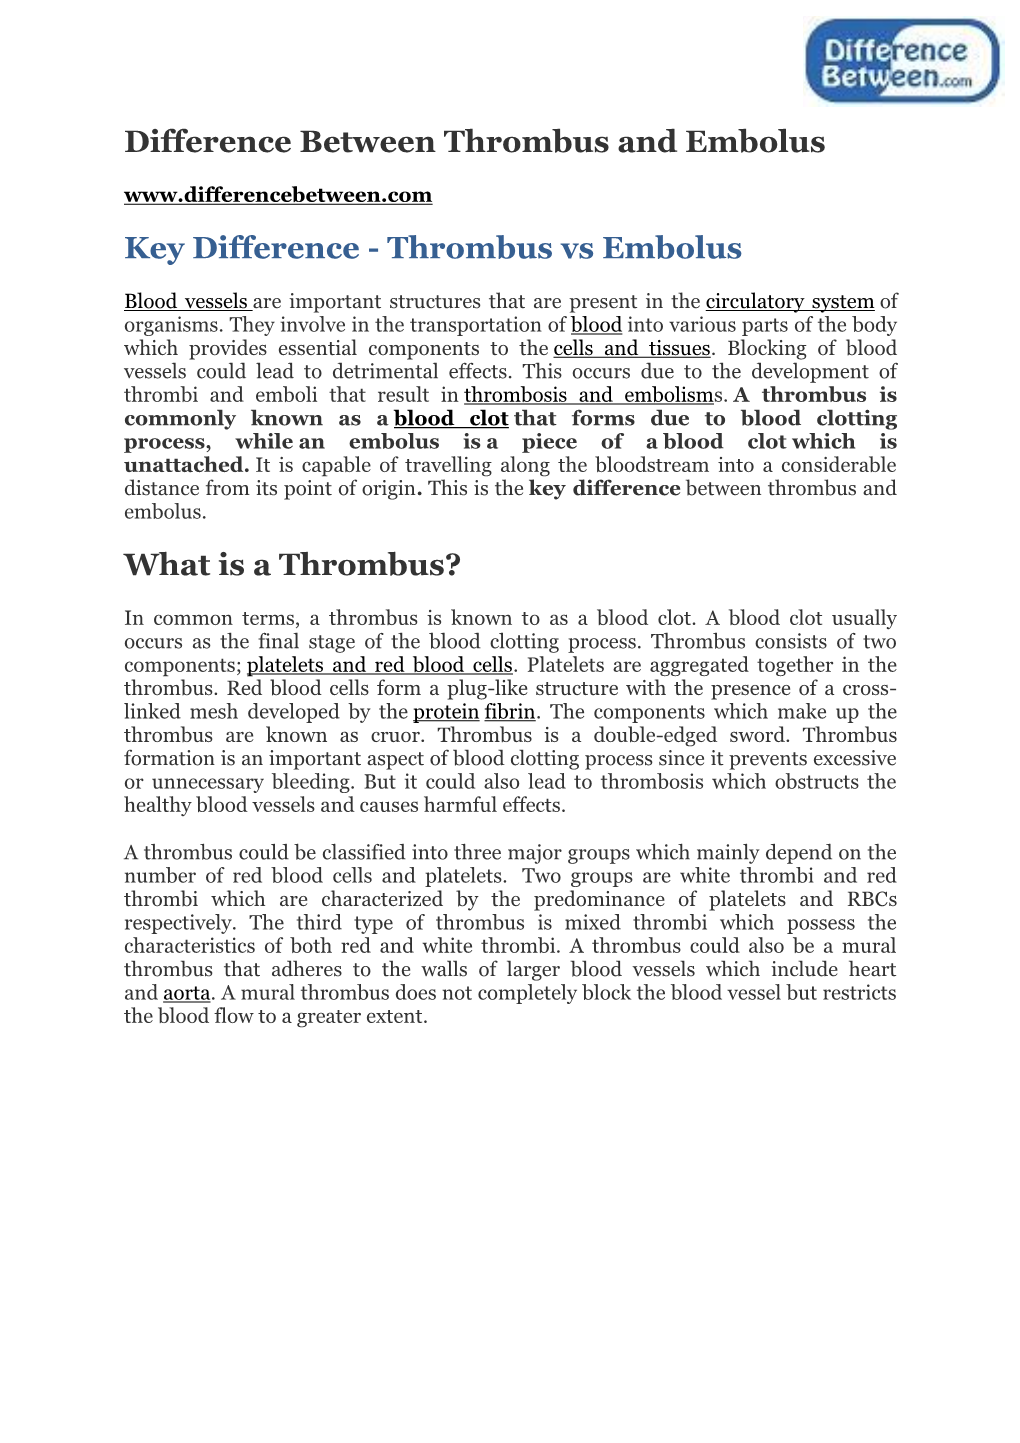 Difference Between Thrombus and Embolus Key Difference